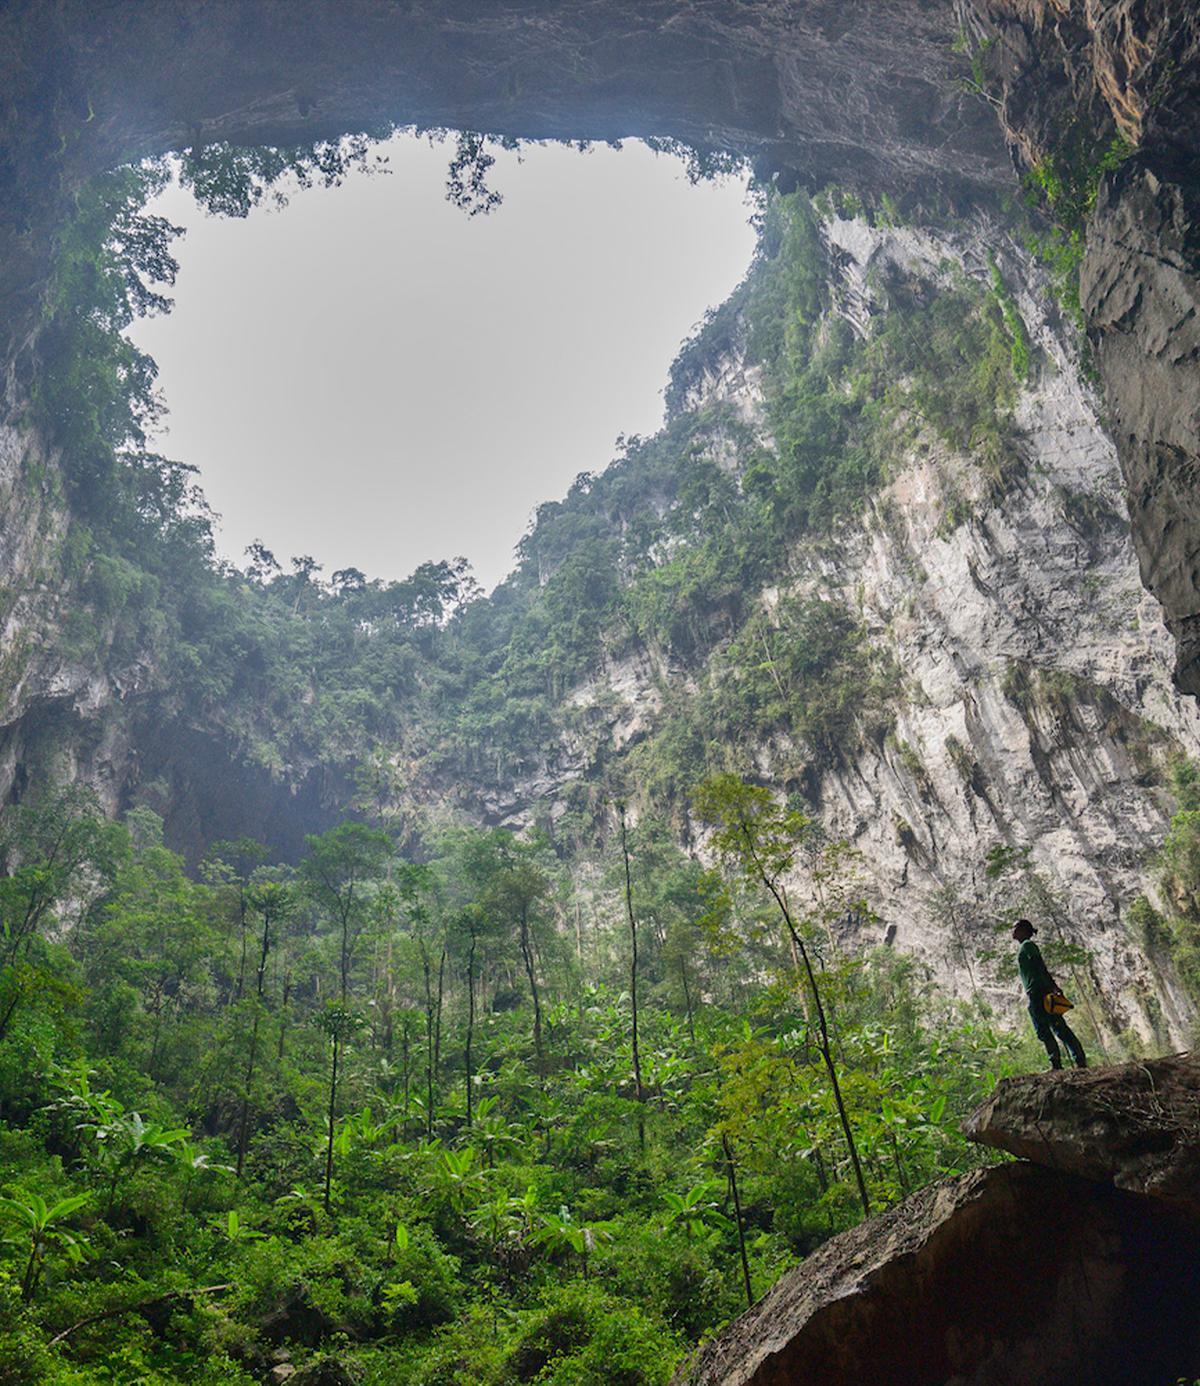 Doline 2 in Son Doong is so large that trees grow inside. (<a href="https://commons.wikimedia.org/wiki/File:Son_Doong_Cave_DB_(3).jpg">Dave Bunnell</a>/CC BY-SA 4.0)